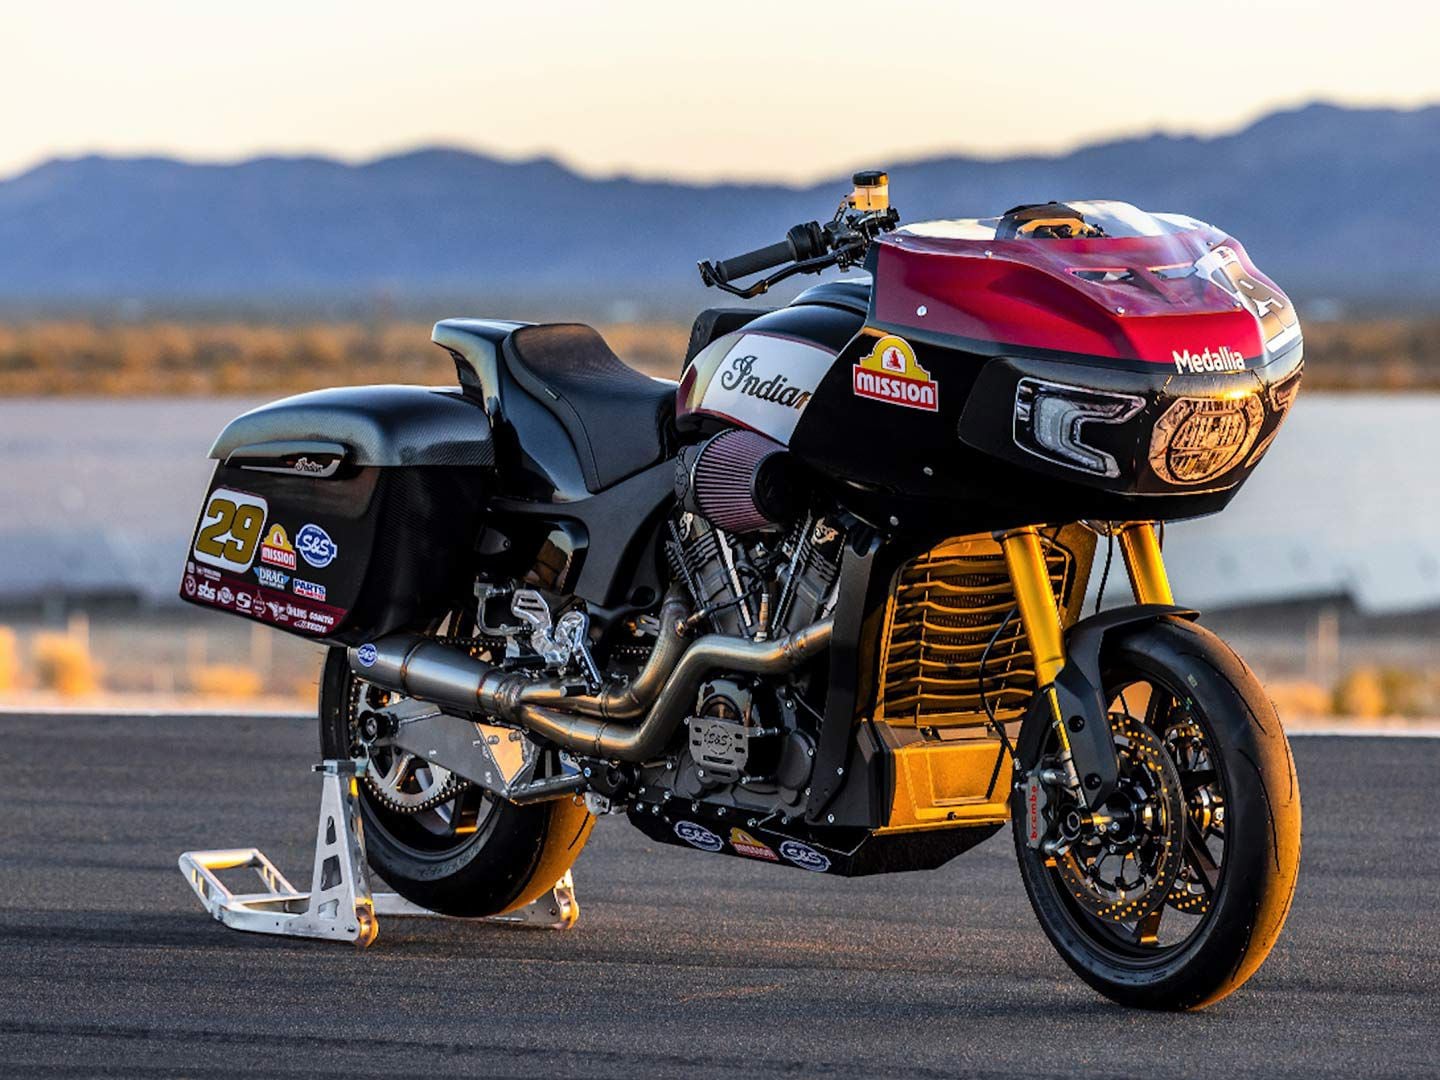 Looking to own a race-spec bagger? Bring a fat checkbook: Indian’s Challenger RR will cost you $92,299.